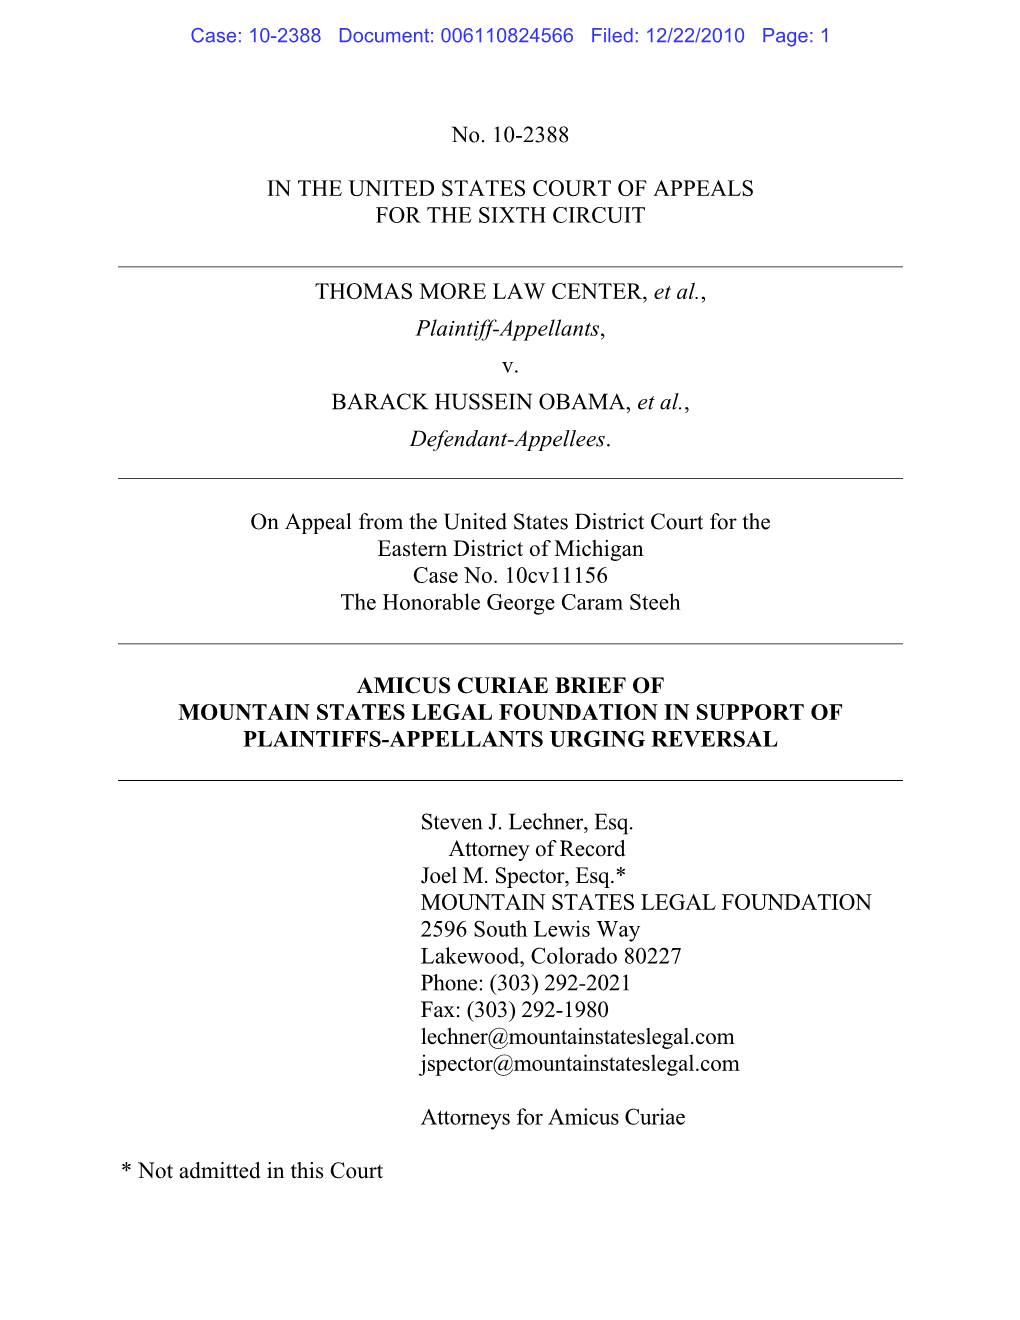 Amicus Curiae Brief of Mountain States Legal Foundation in Support of Plaintiffs-Appellants Urging Reversal